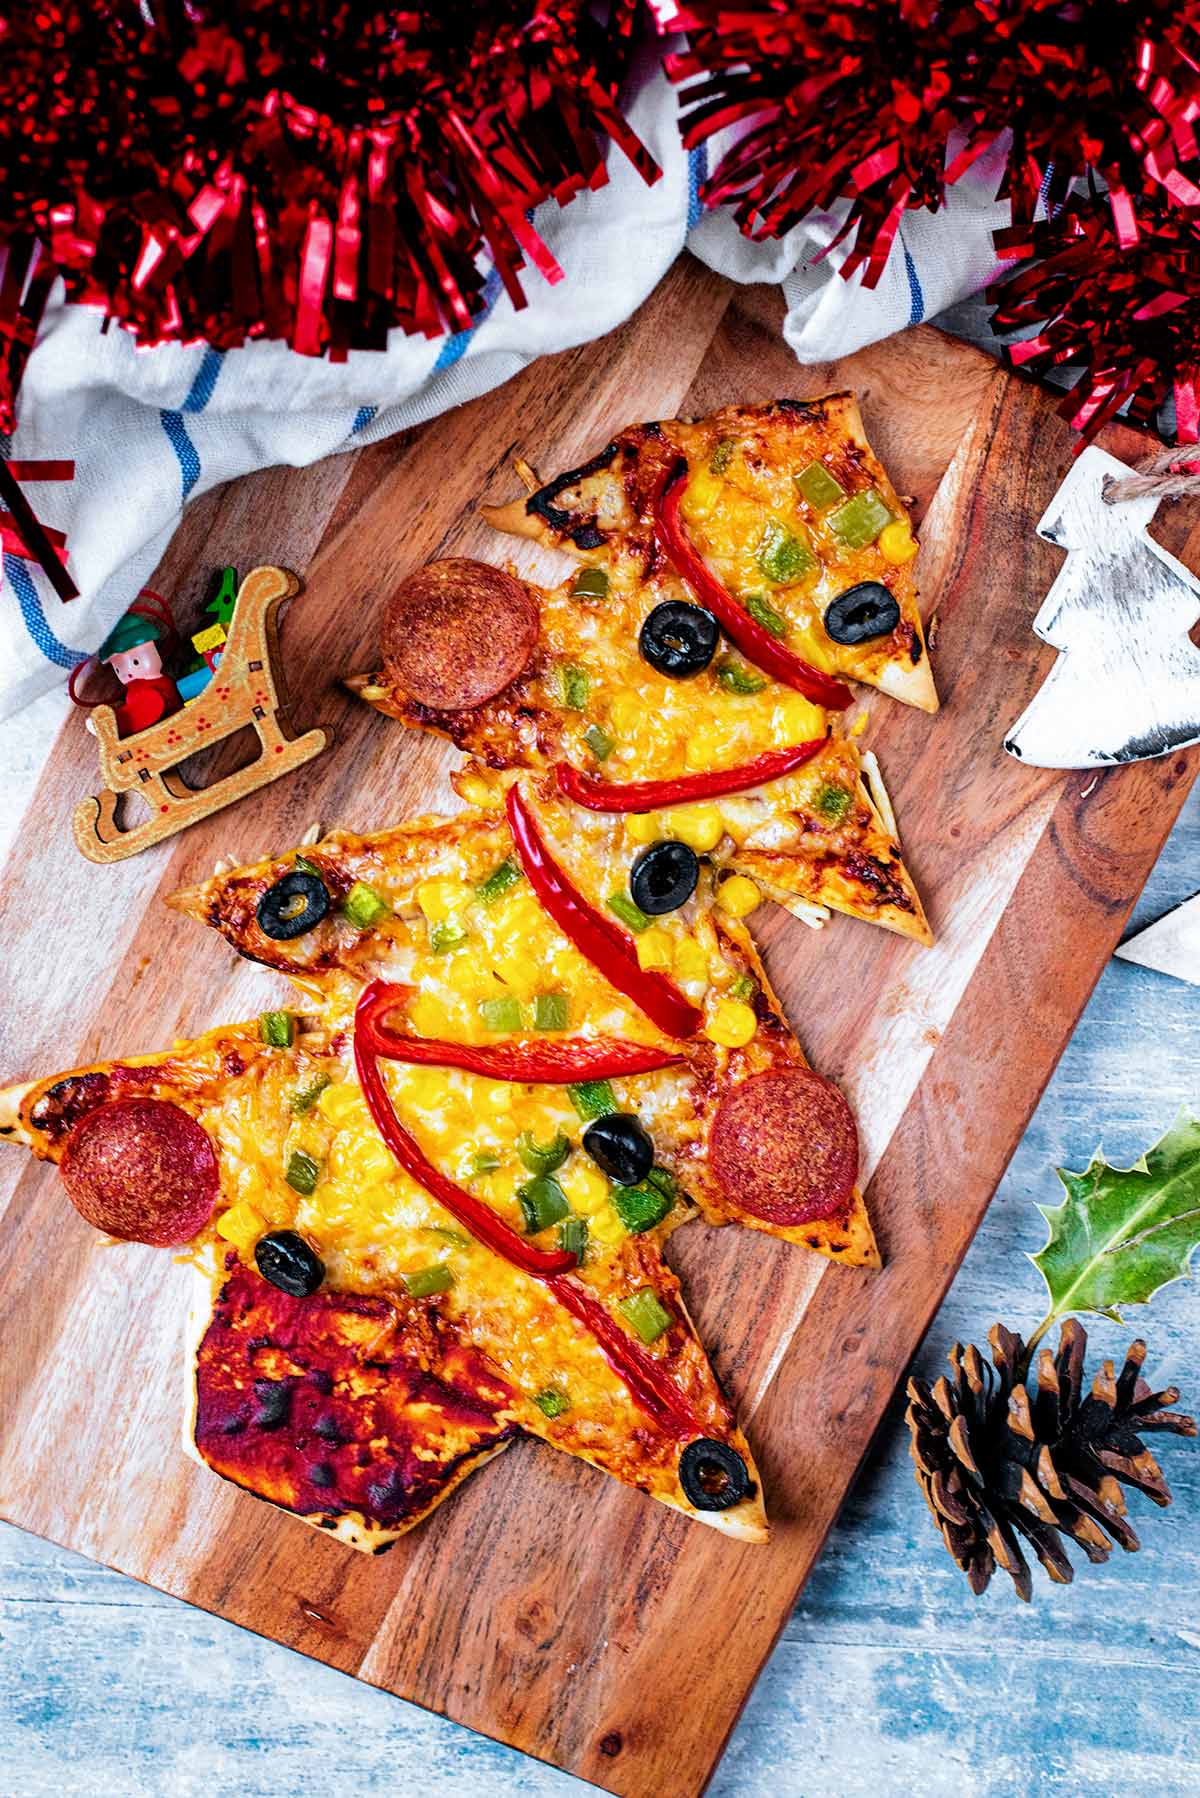 A Christmas Tree shaped Pizza on a wooden board with red tinsel next to it.